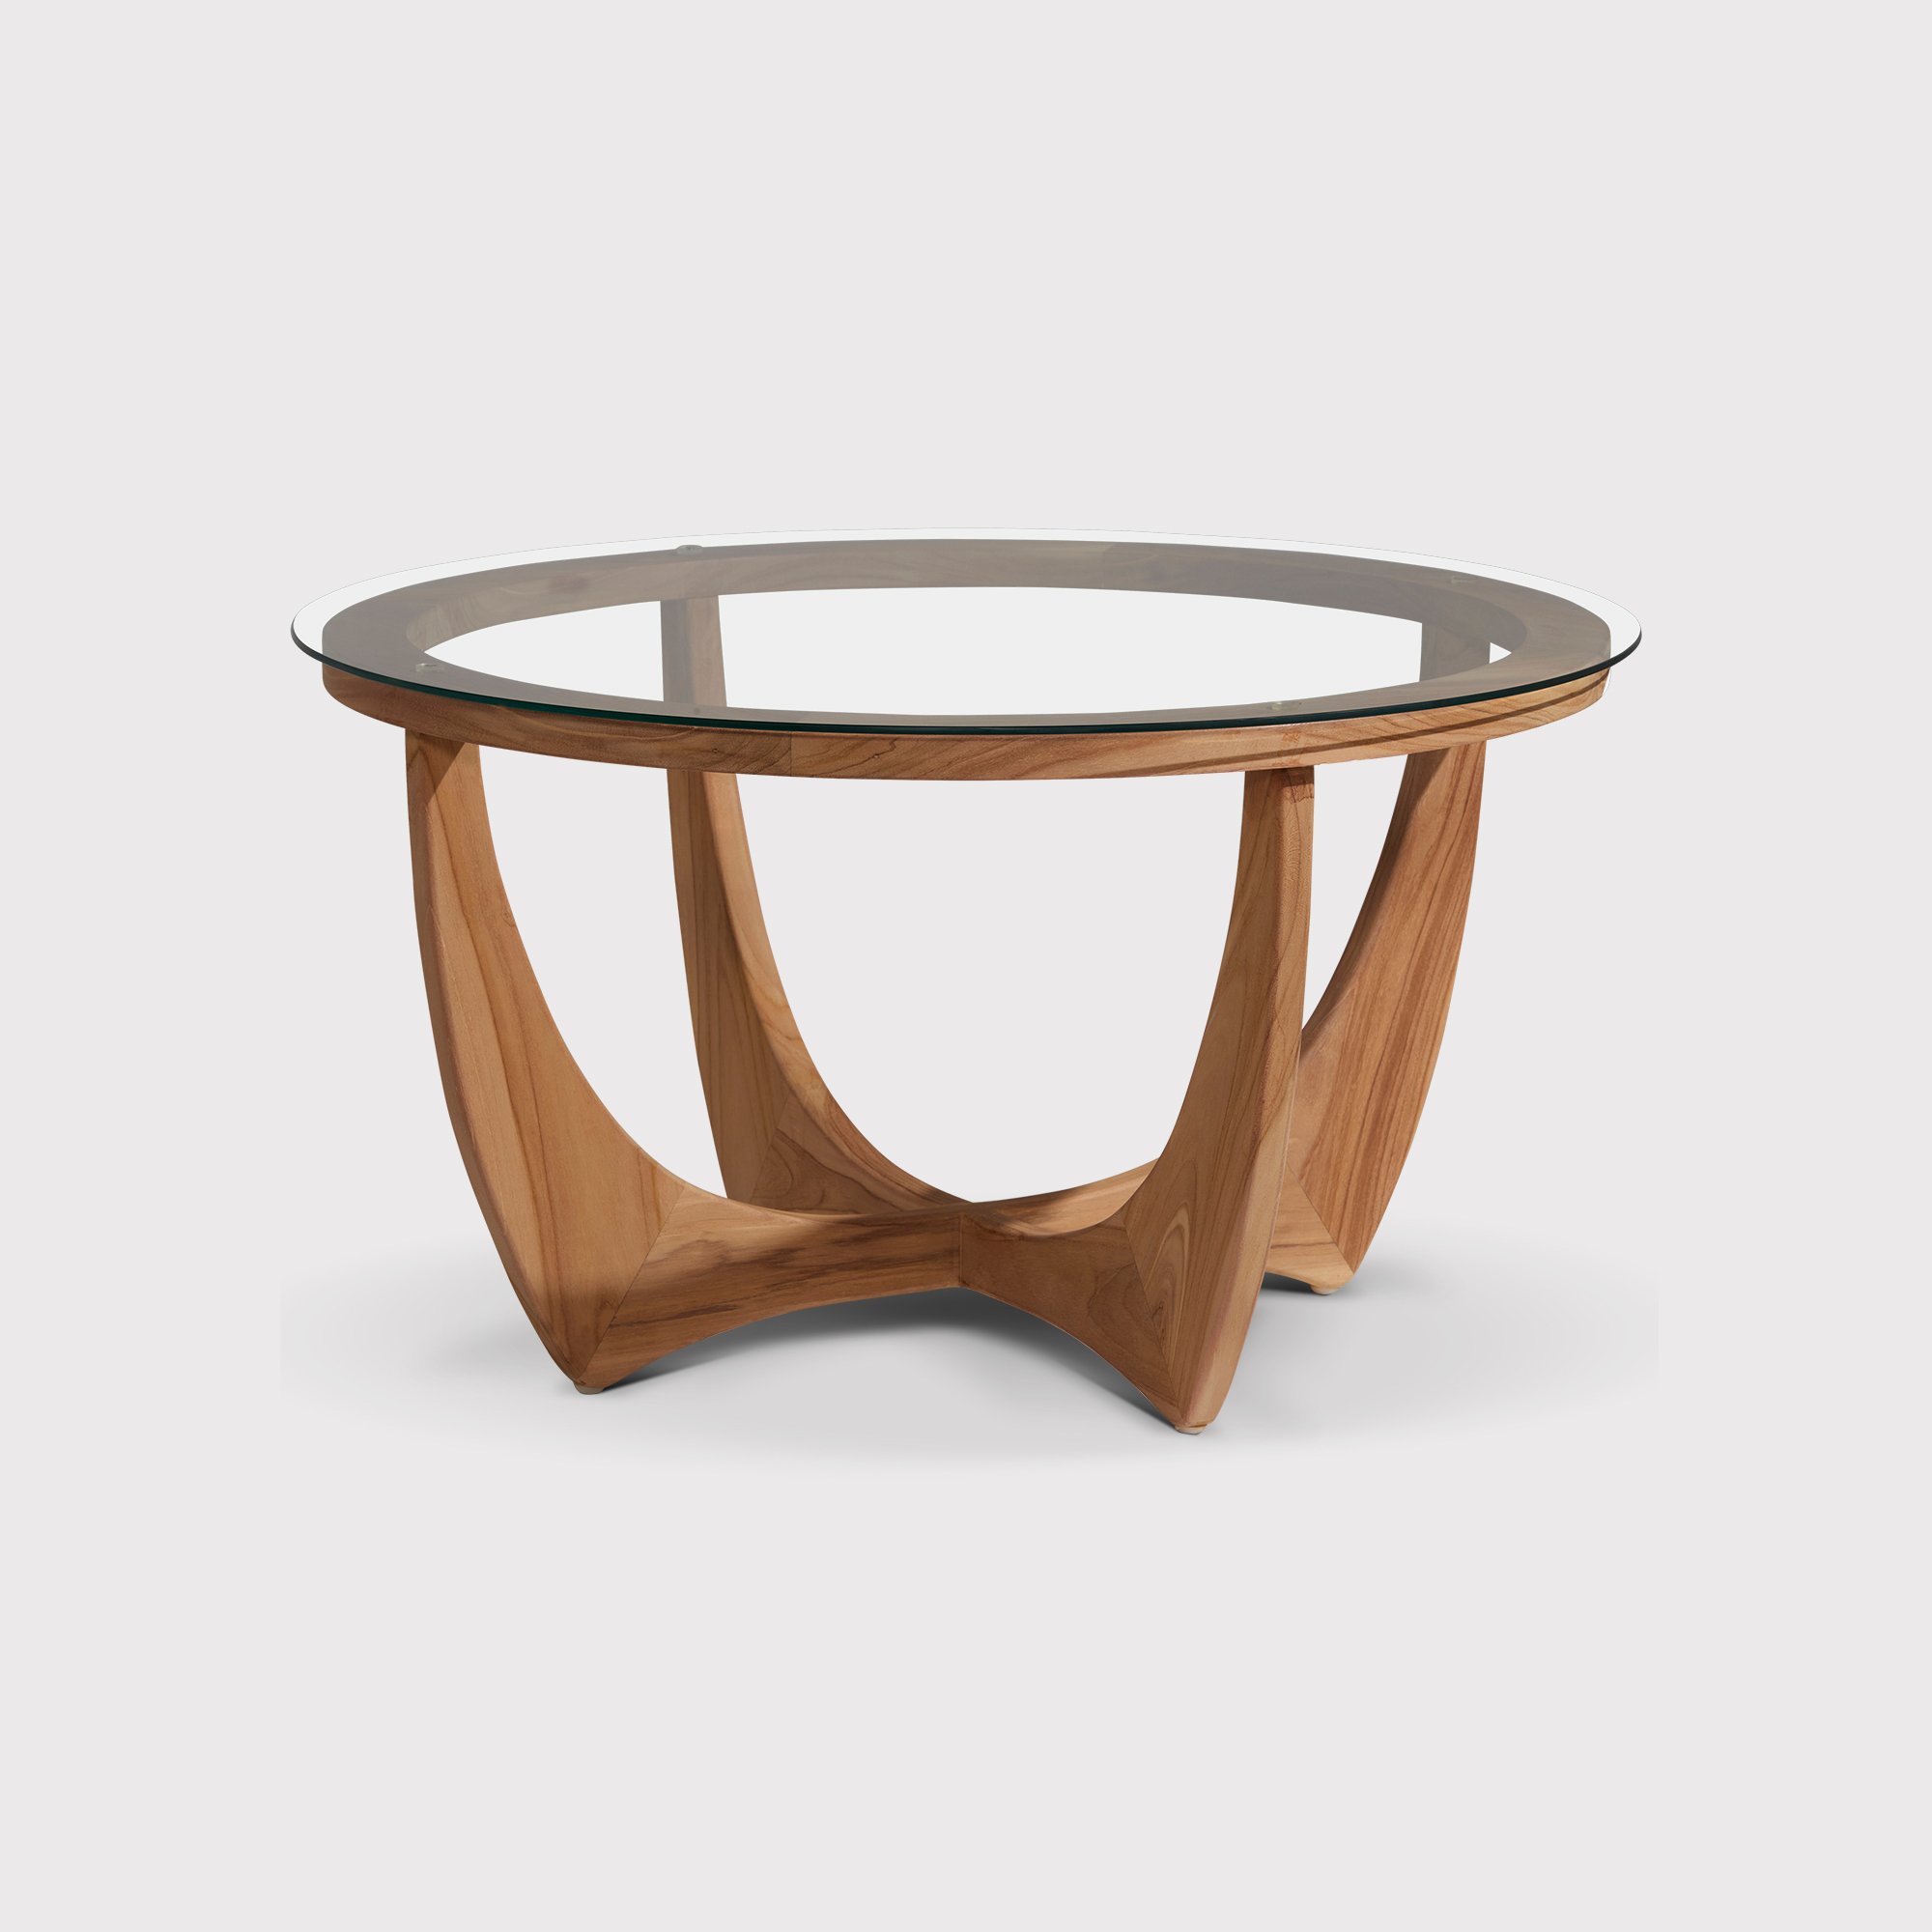 Yves Coffee Table, Round, Brown | Barker & Stonehouse